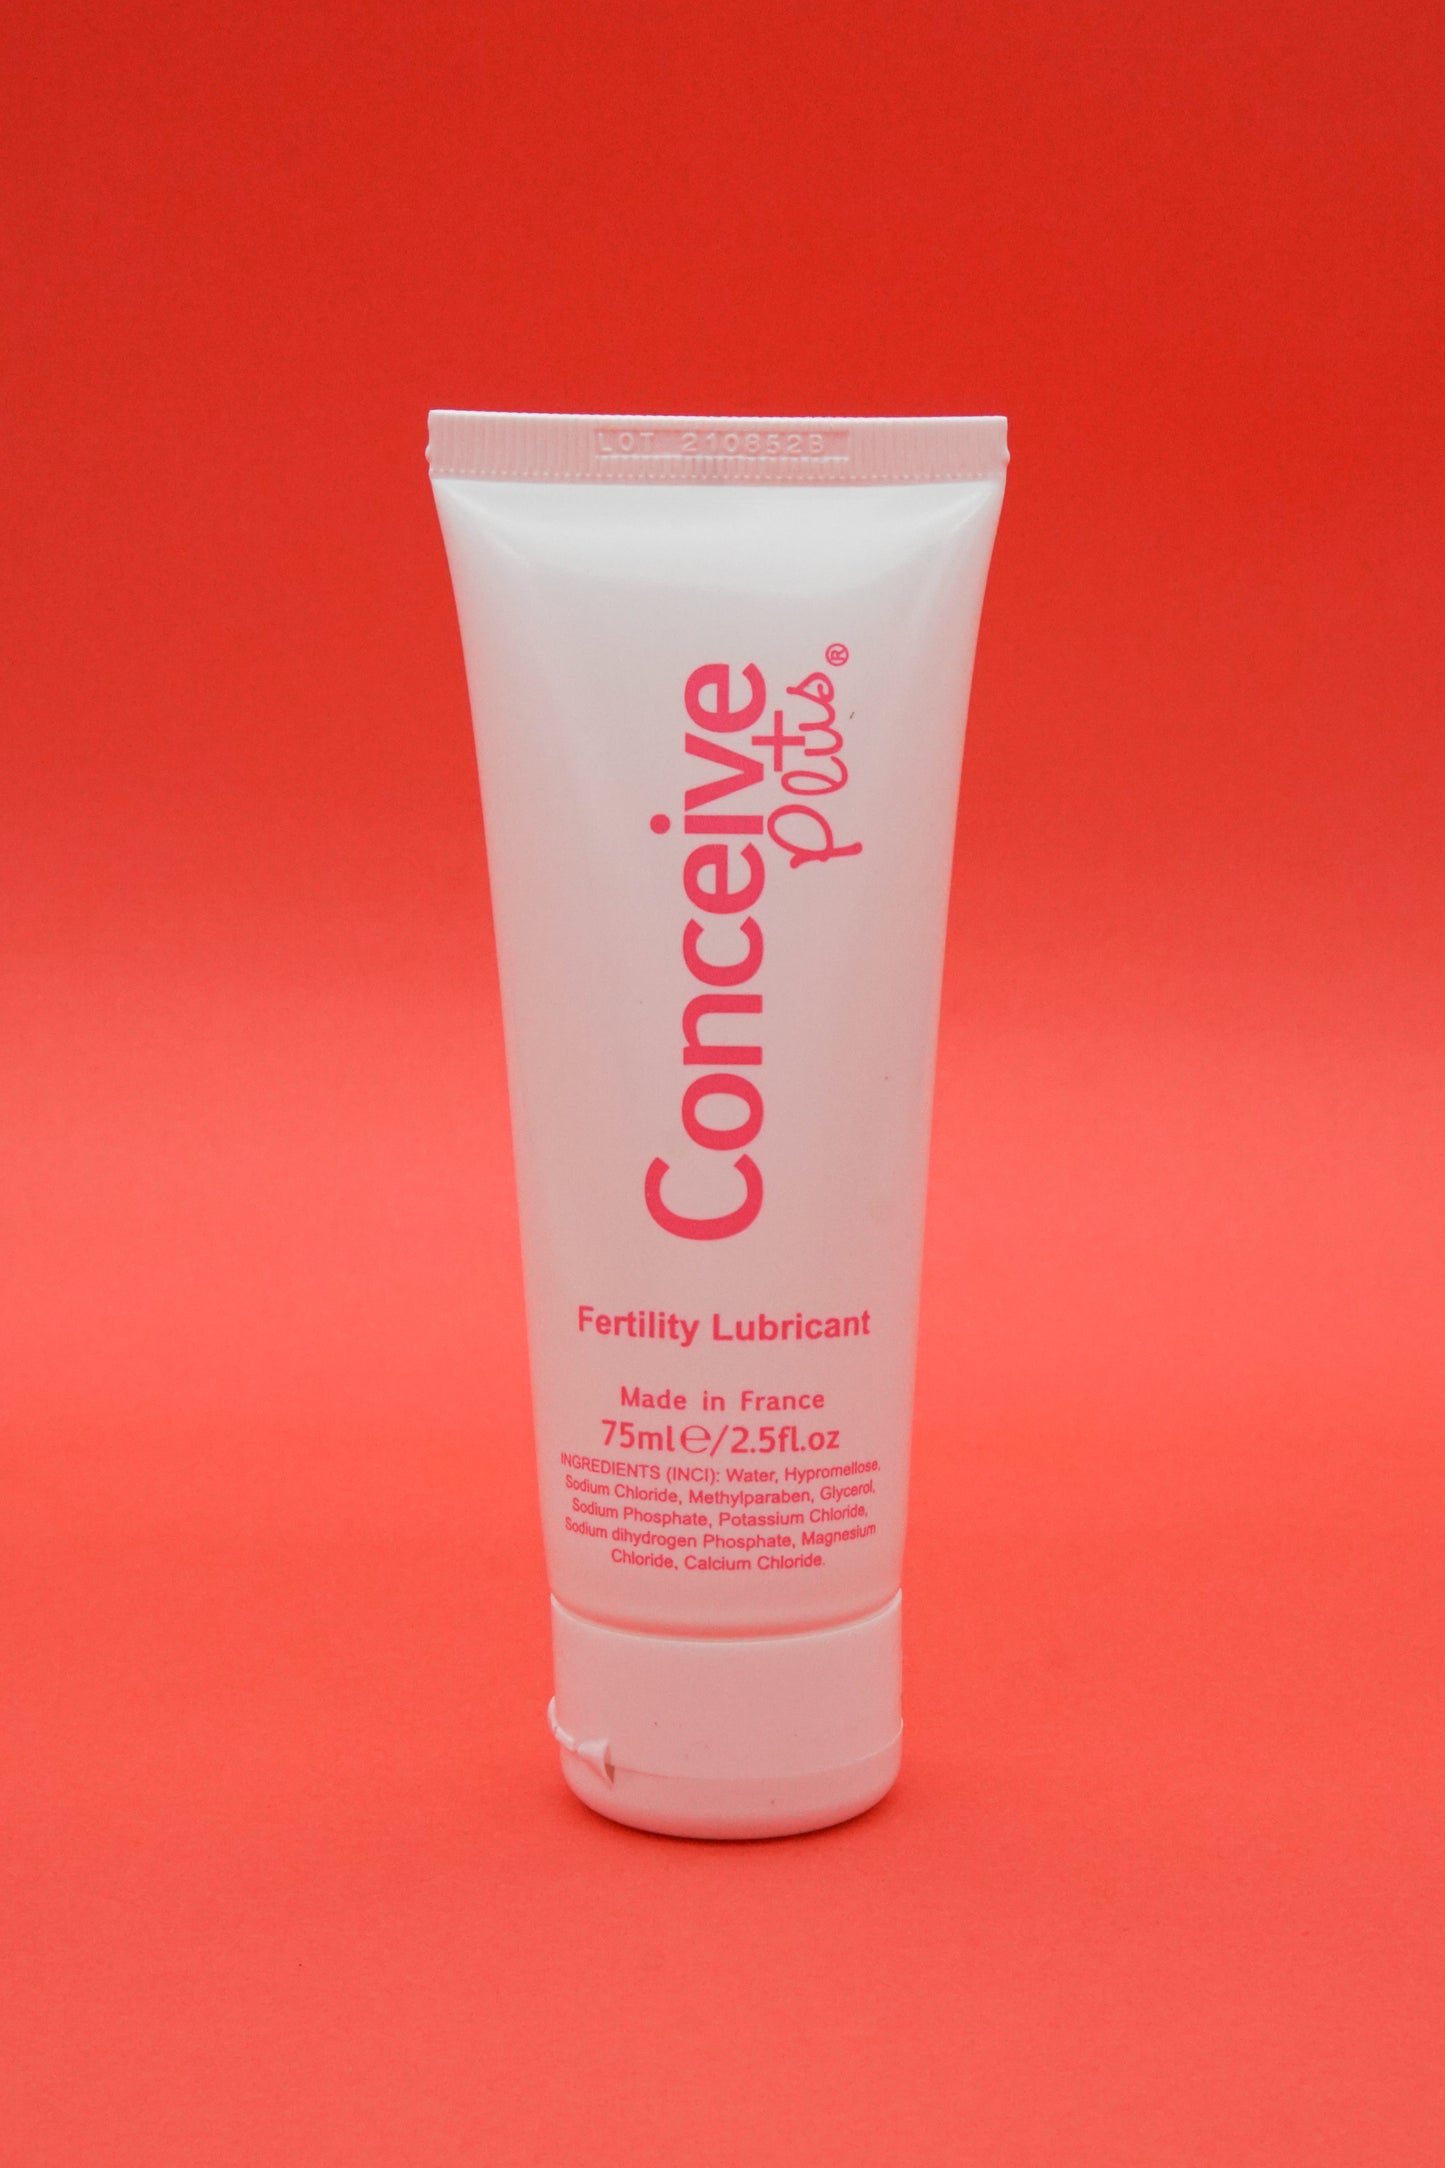 Tube of Conceive Plus